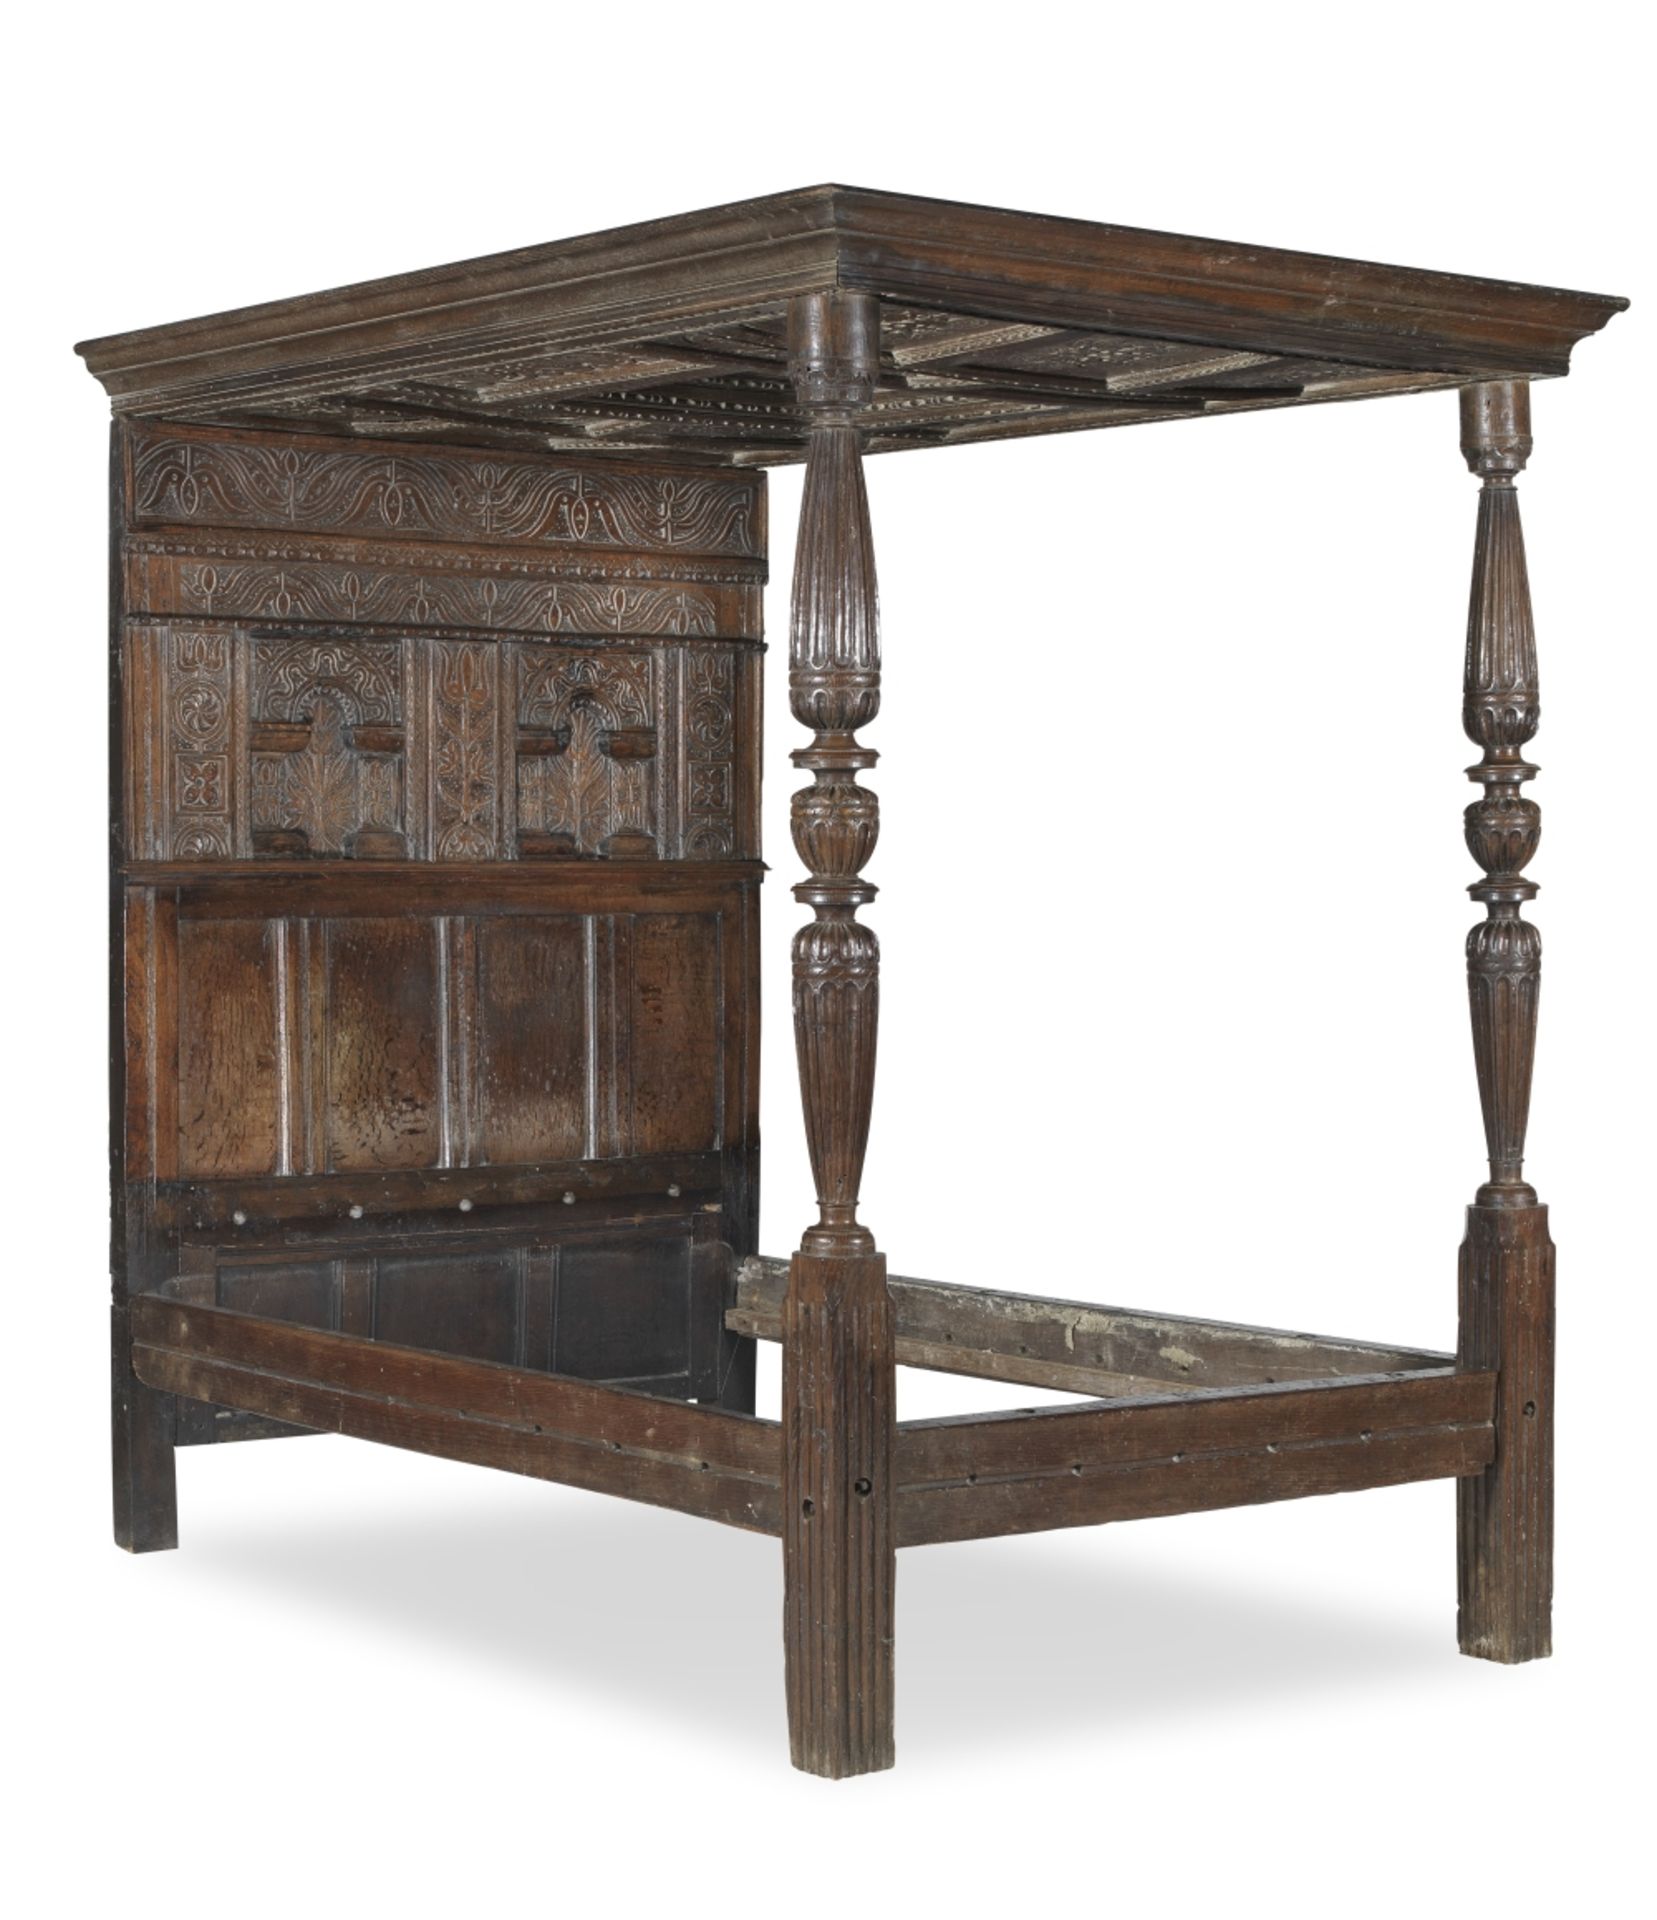 A South West oak jointed and panelled tester bed Early 17th century and later